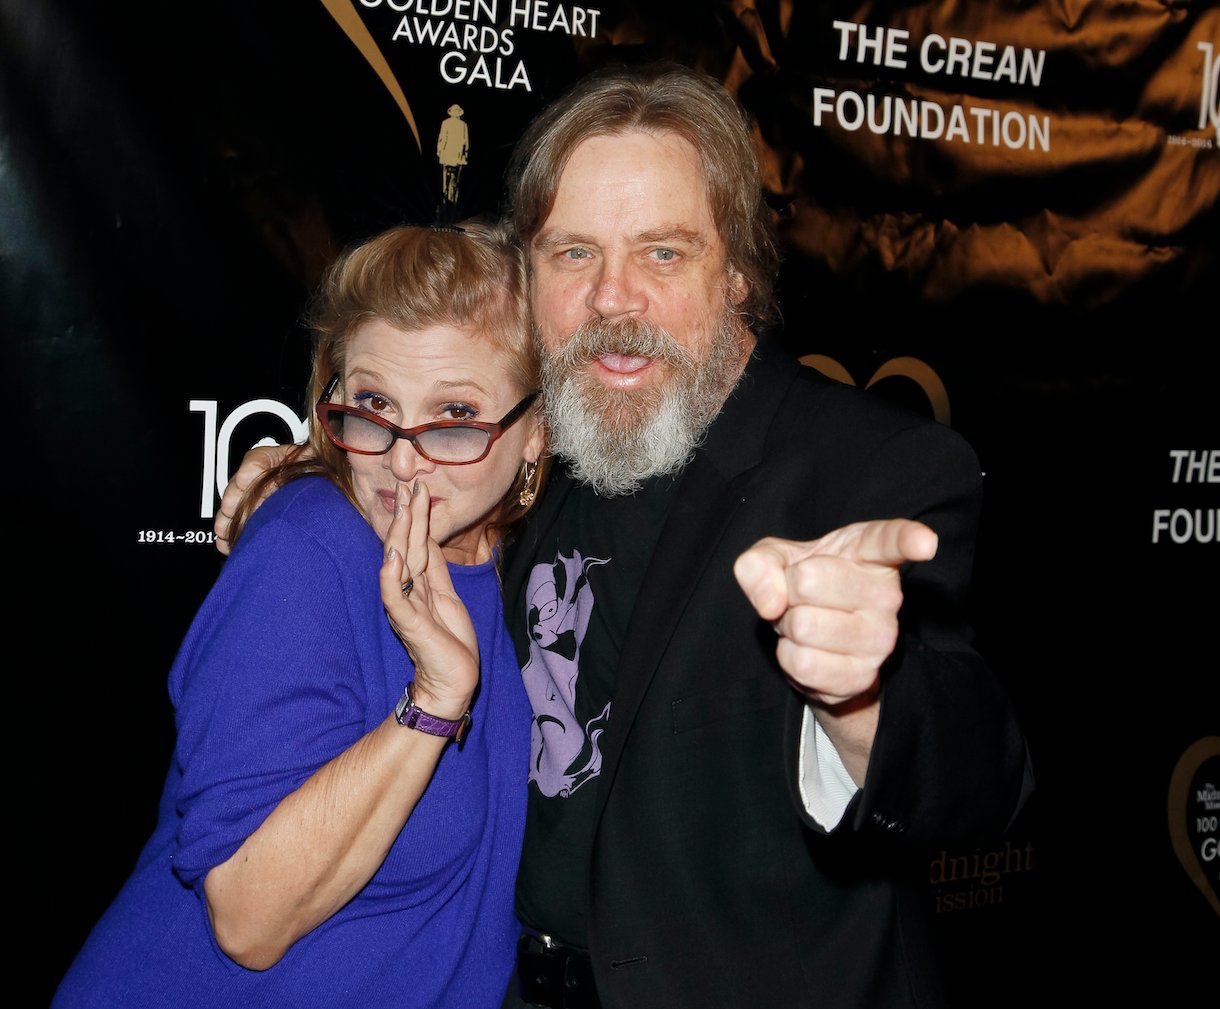 Carrie Fisher and Mark Hamill in 2014